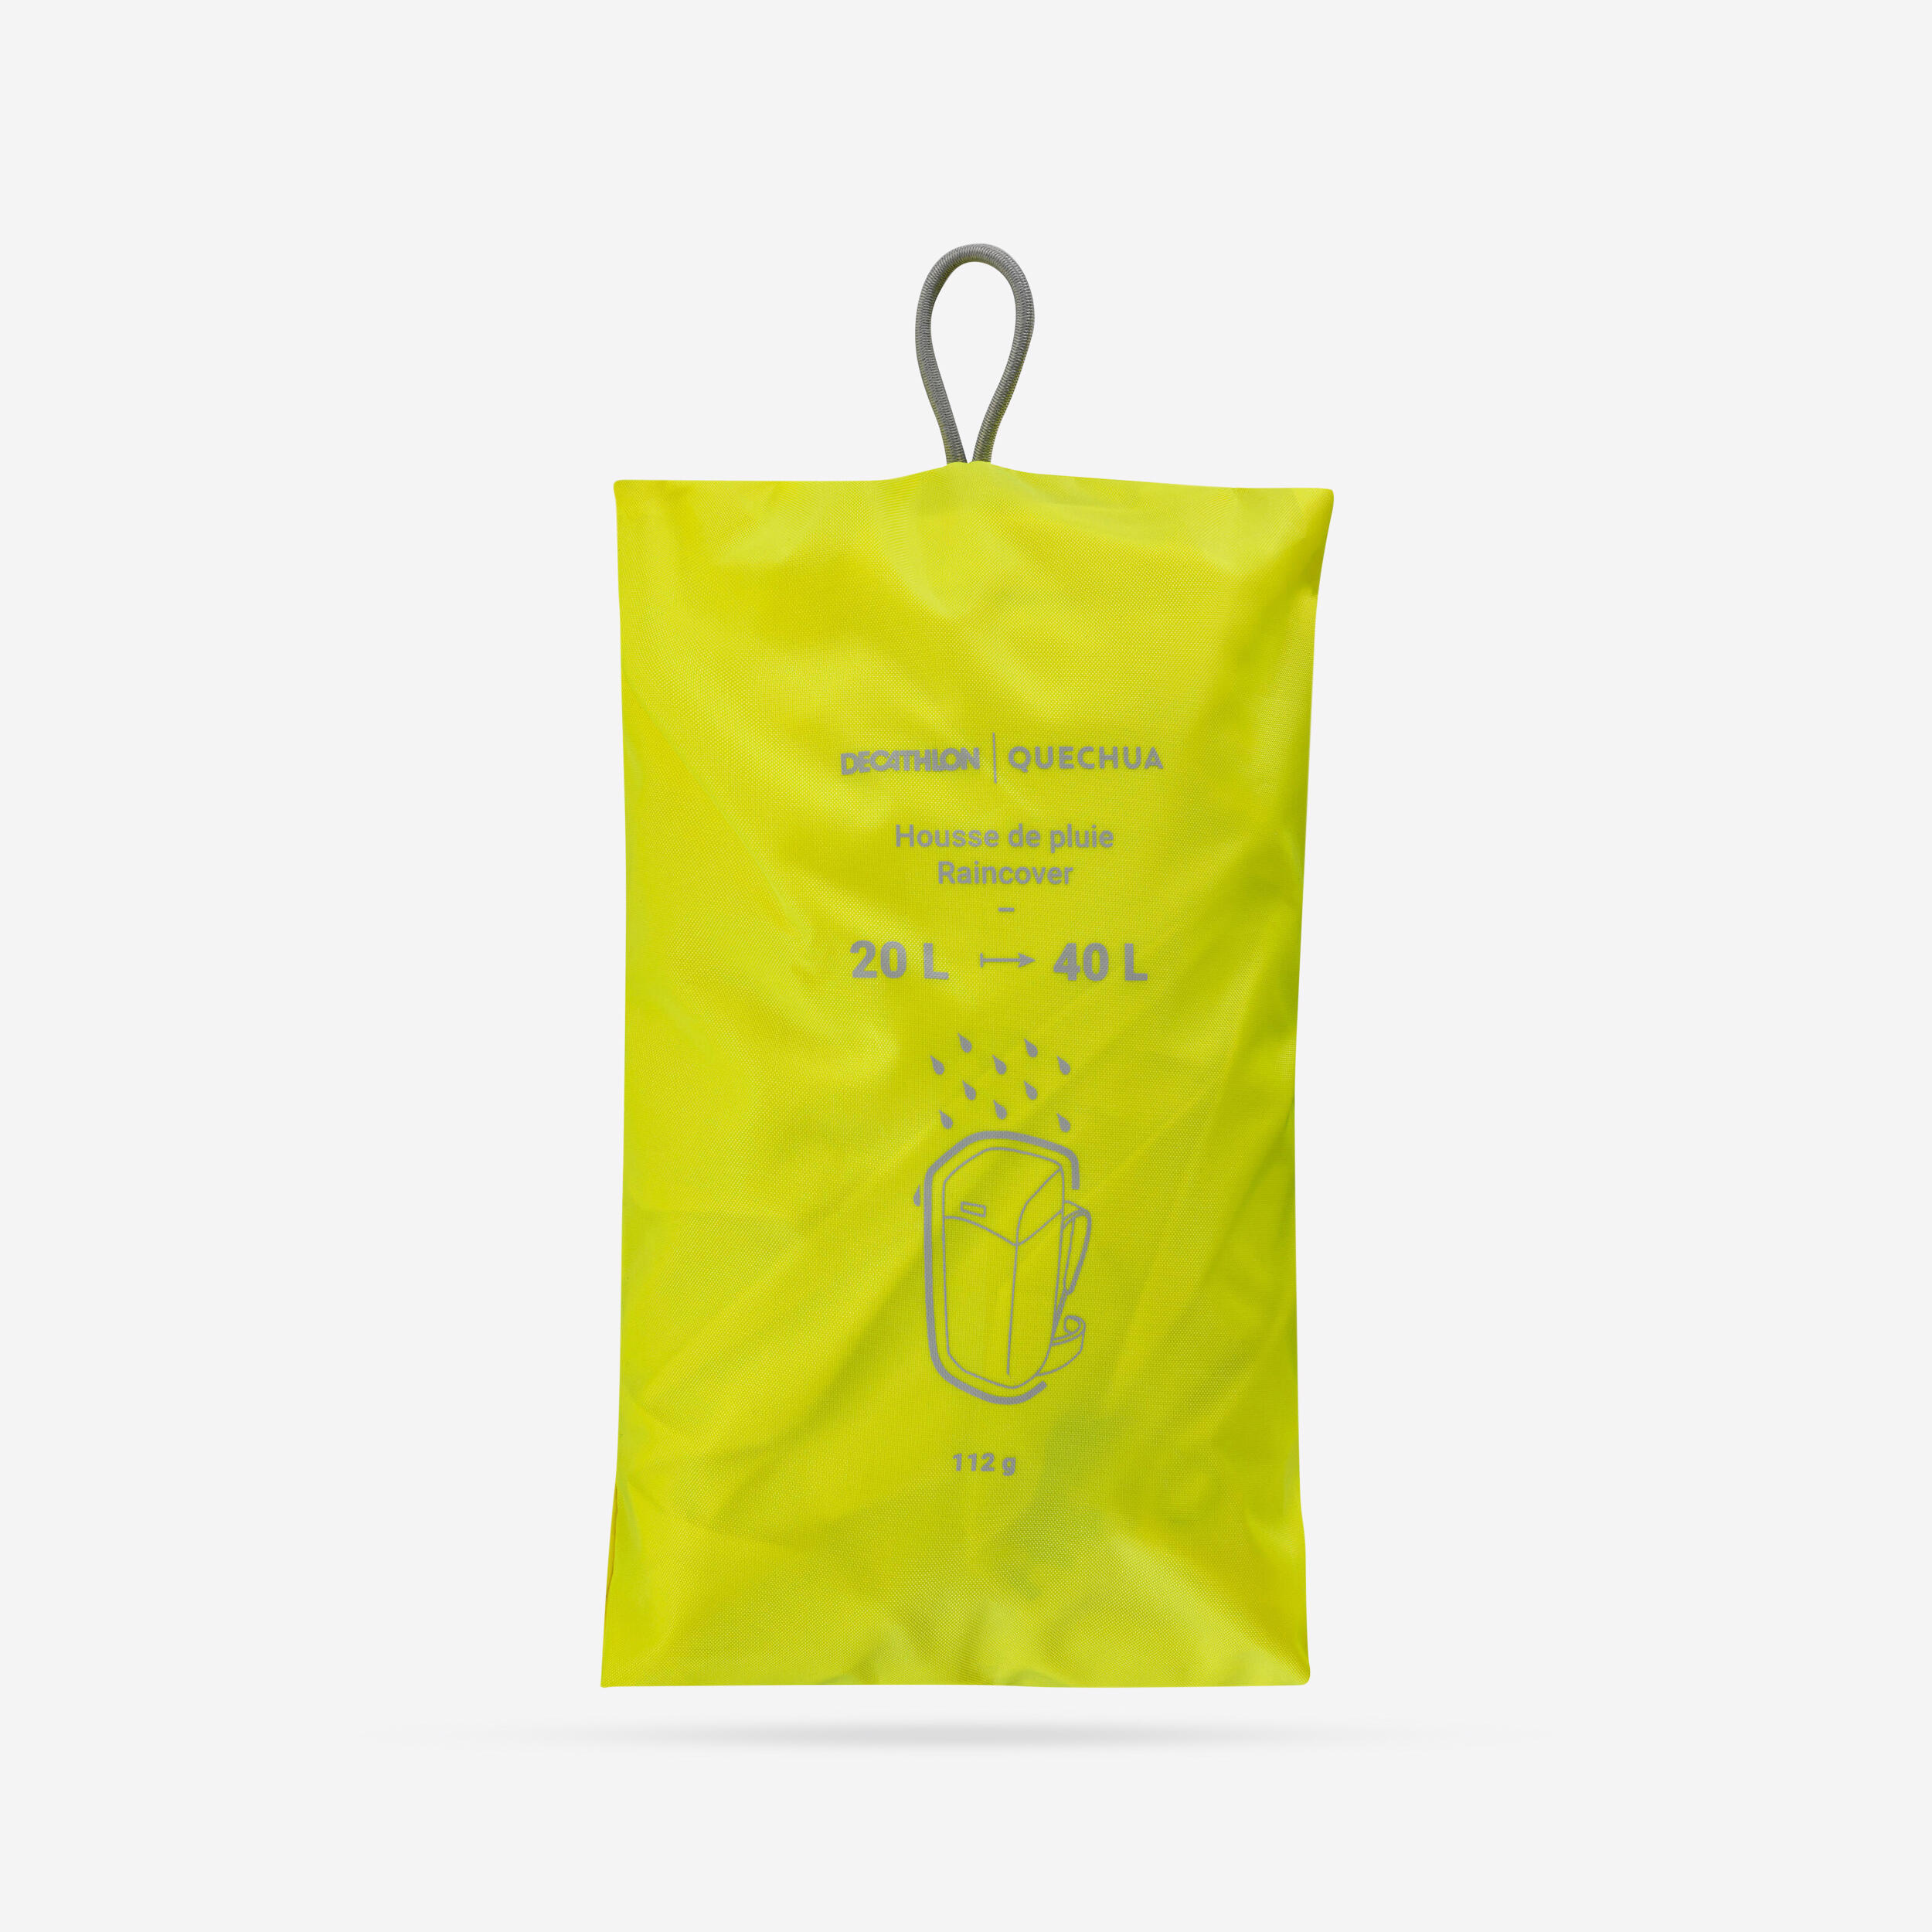 20-40 L Rain Cover for Backpack - Yellow - FORCLAZ